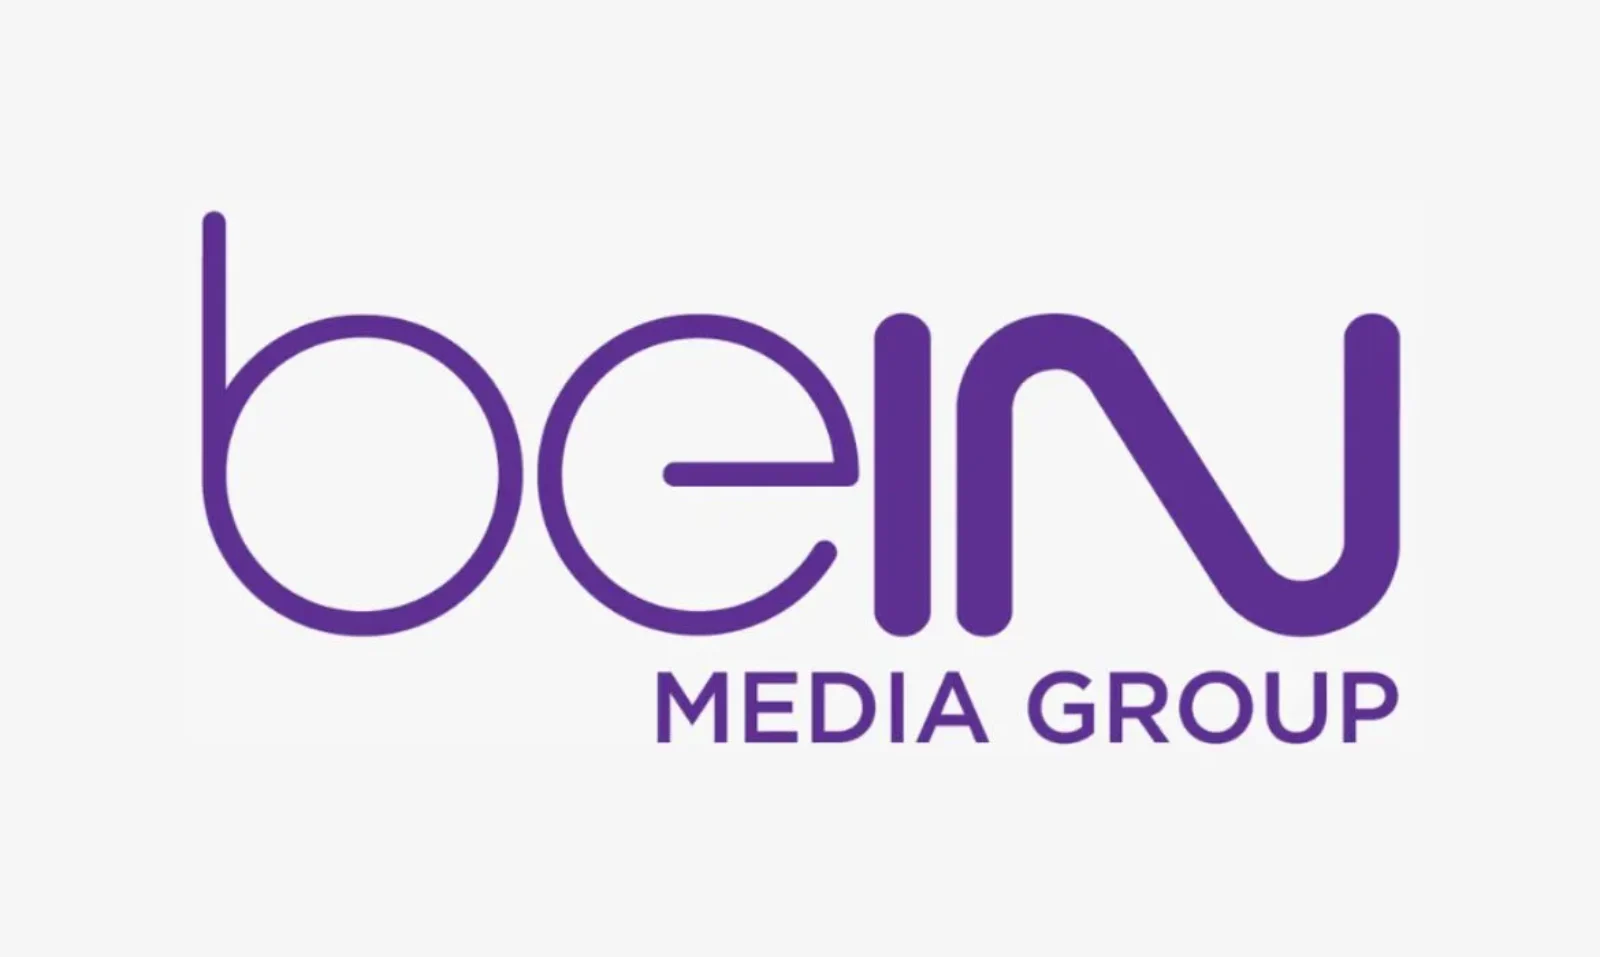 Advertising, beIN media group, MENA, connected tv, set-top boxes, Synamedia, Synamedia iris, targeted tv advertising, CTV, sports, entertainment, broadcast advertising, MENA, addressable advertising platform, targeted advertising, advertising inventory, campaigns, digital media, broadcast media, streaming services, local brands, international brands, local audiences, advertising offerings, SaaS, software-as-a-service, campaign performance, campaign parameters, STBs, media buyers, cloud-based, addressable advertising,